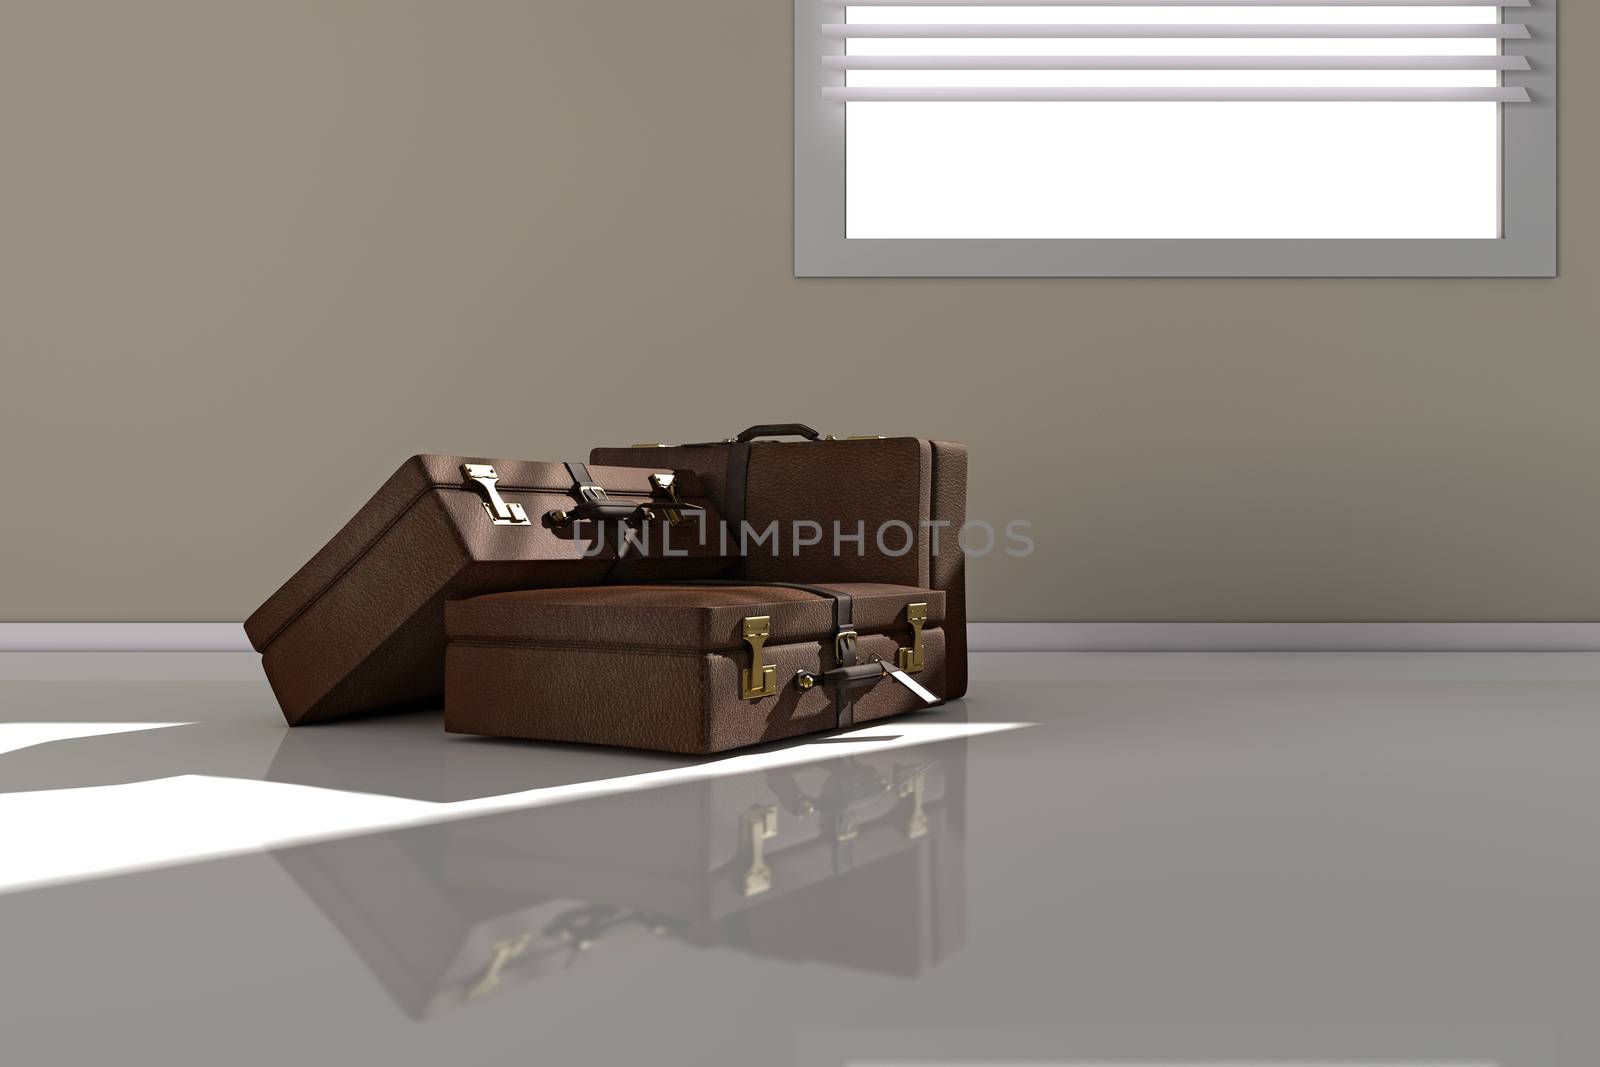 Suitcases near window by dynamicfoto